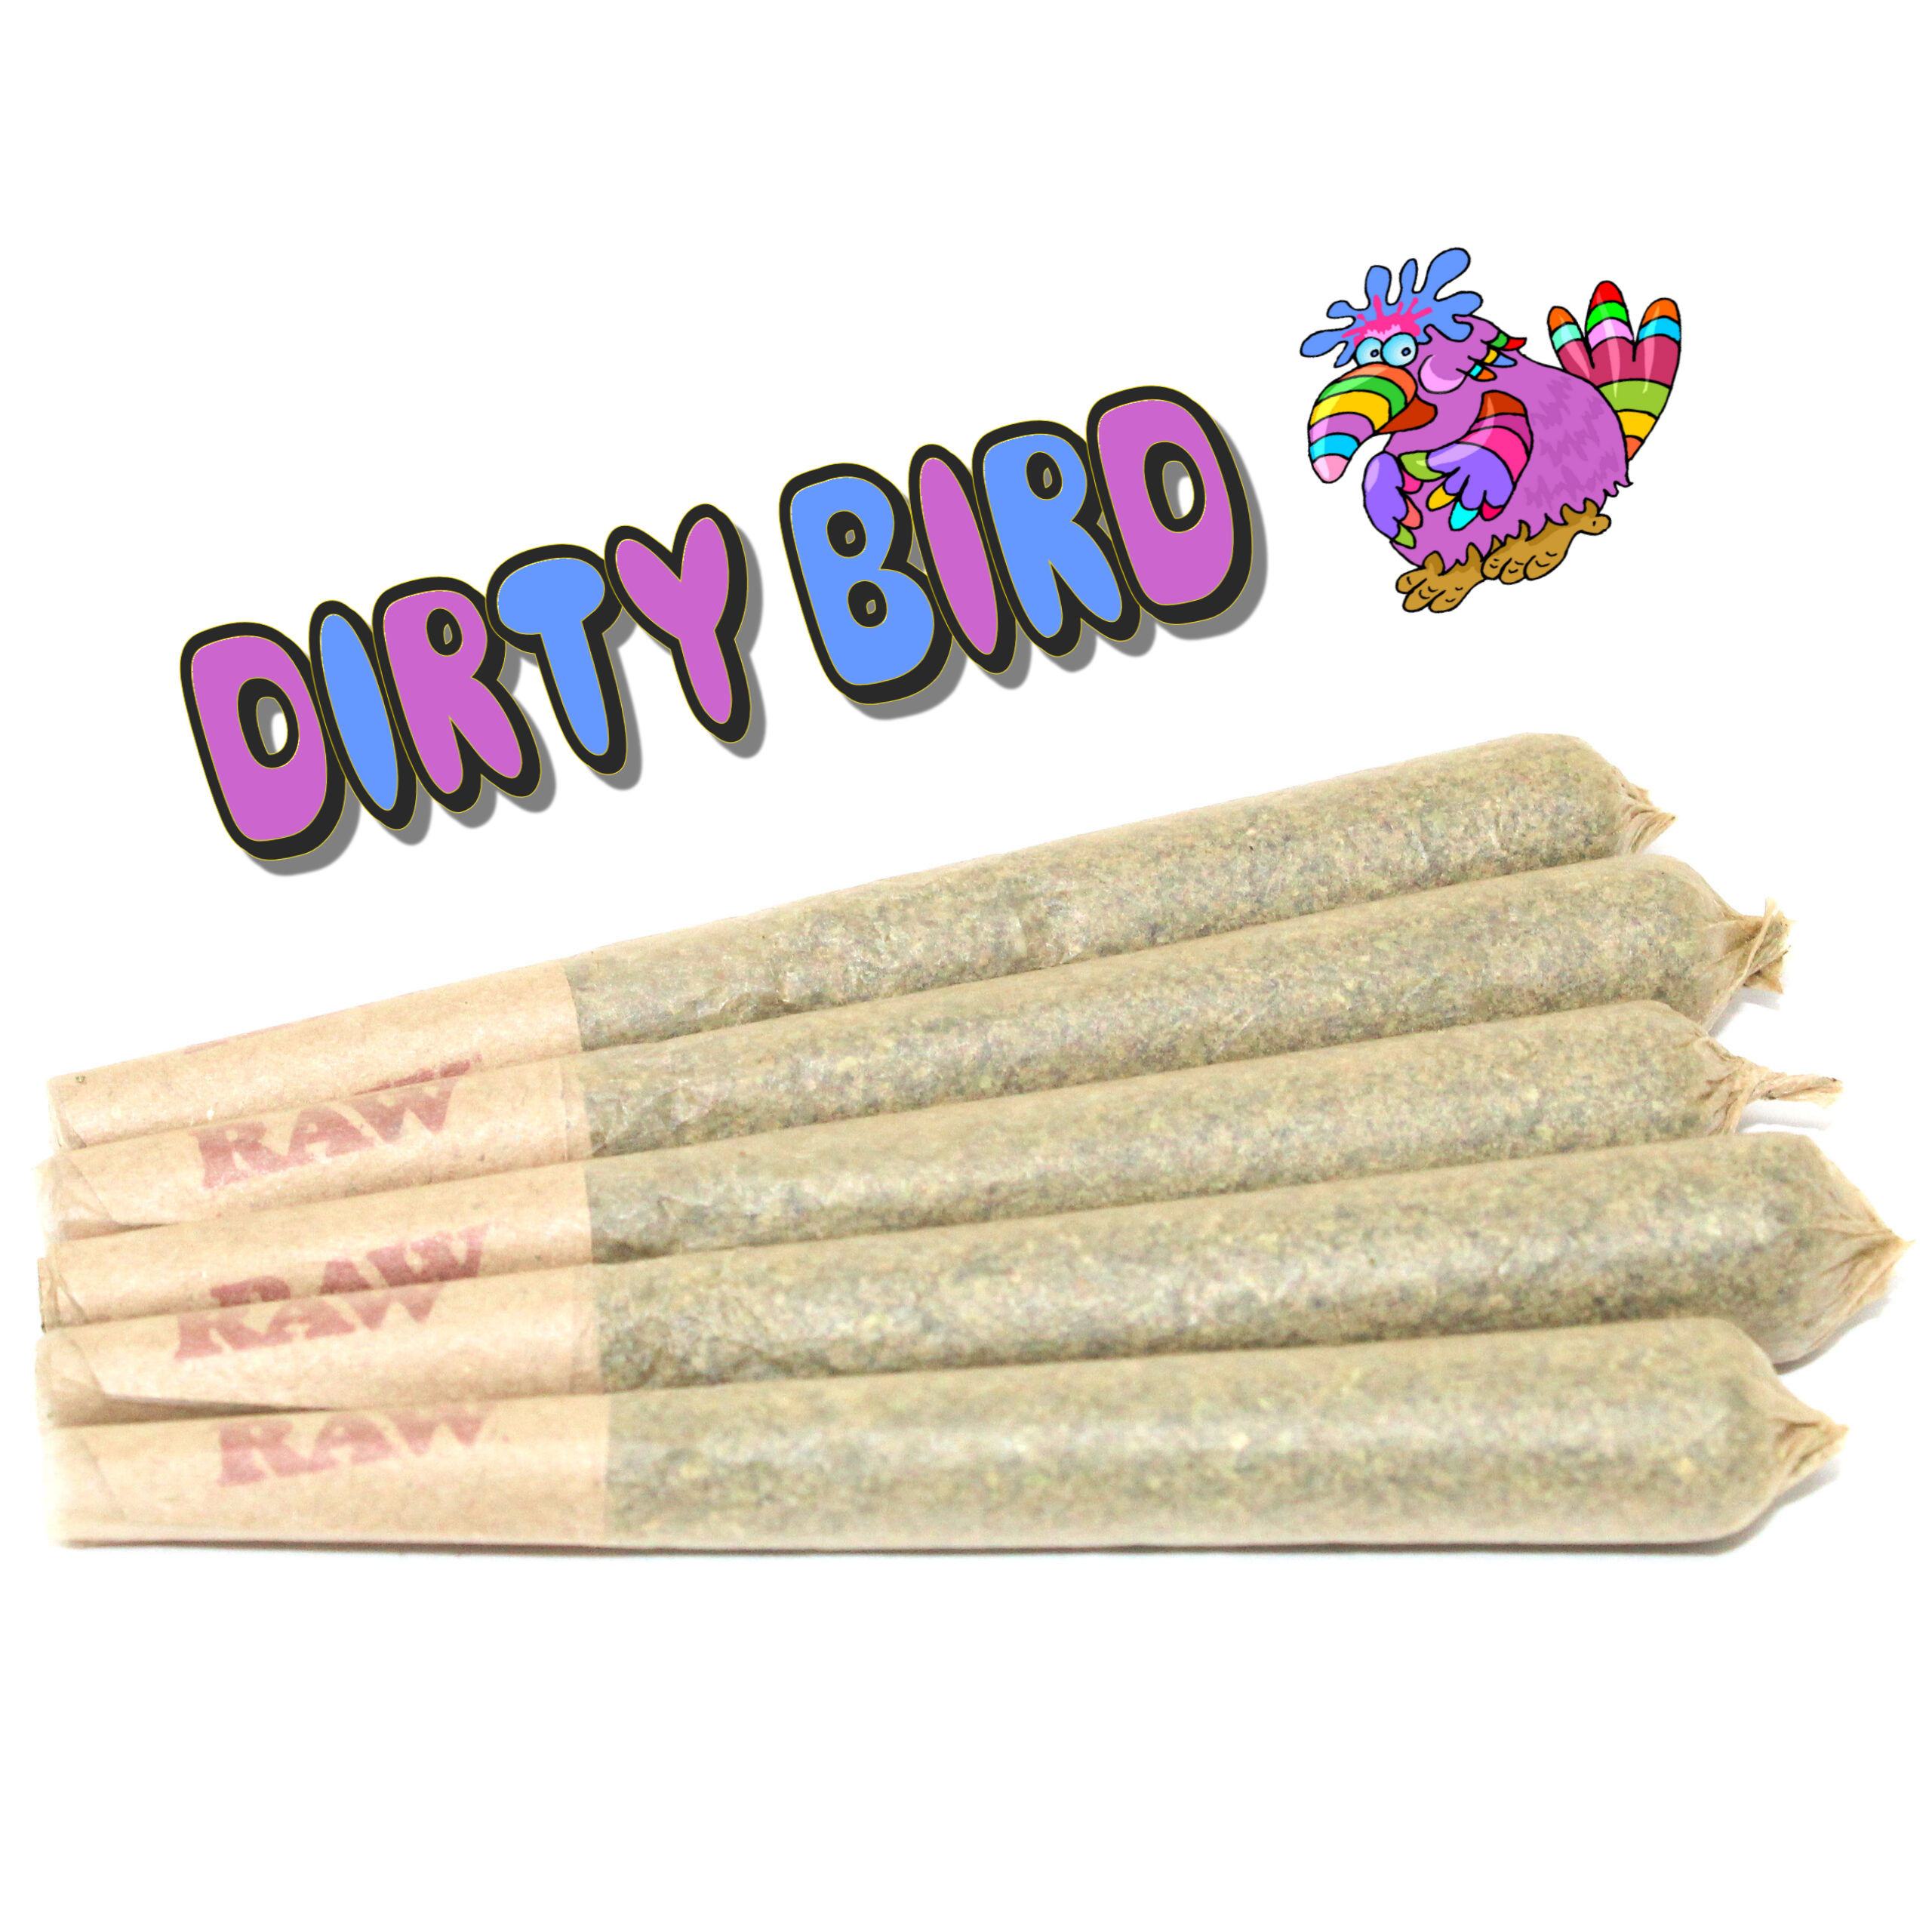 PRE-ROLLED JOINT - 'AAAA' DIRTY BIRD (1G)